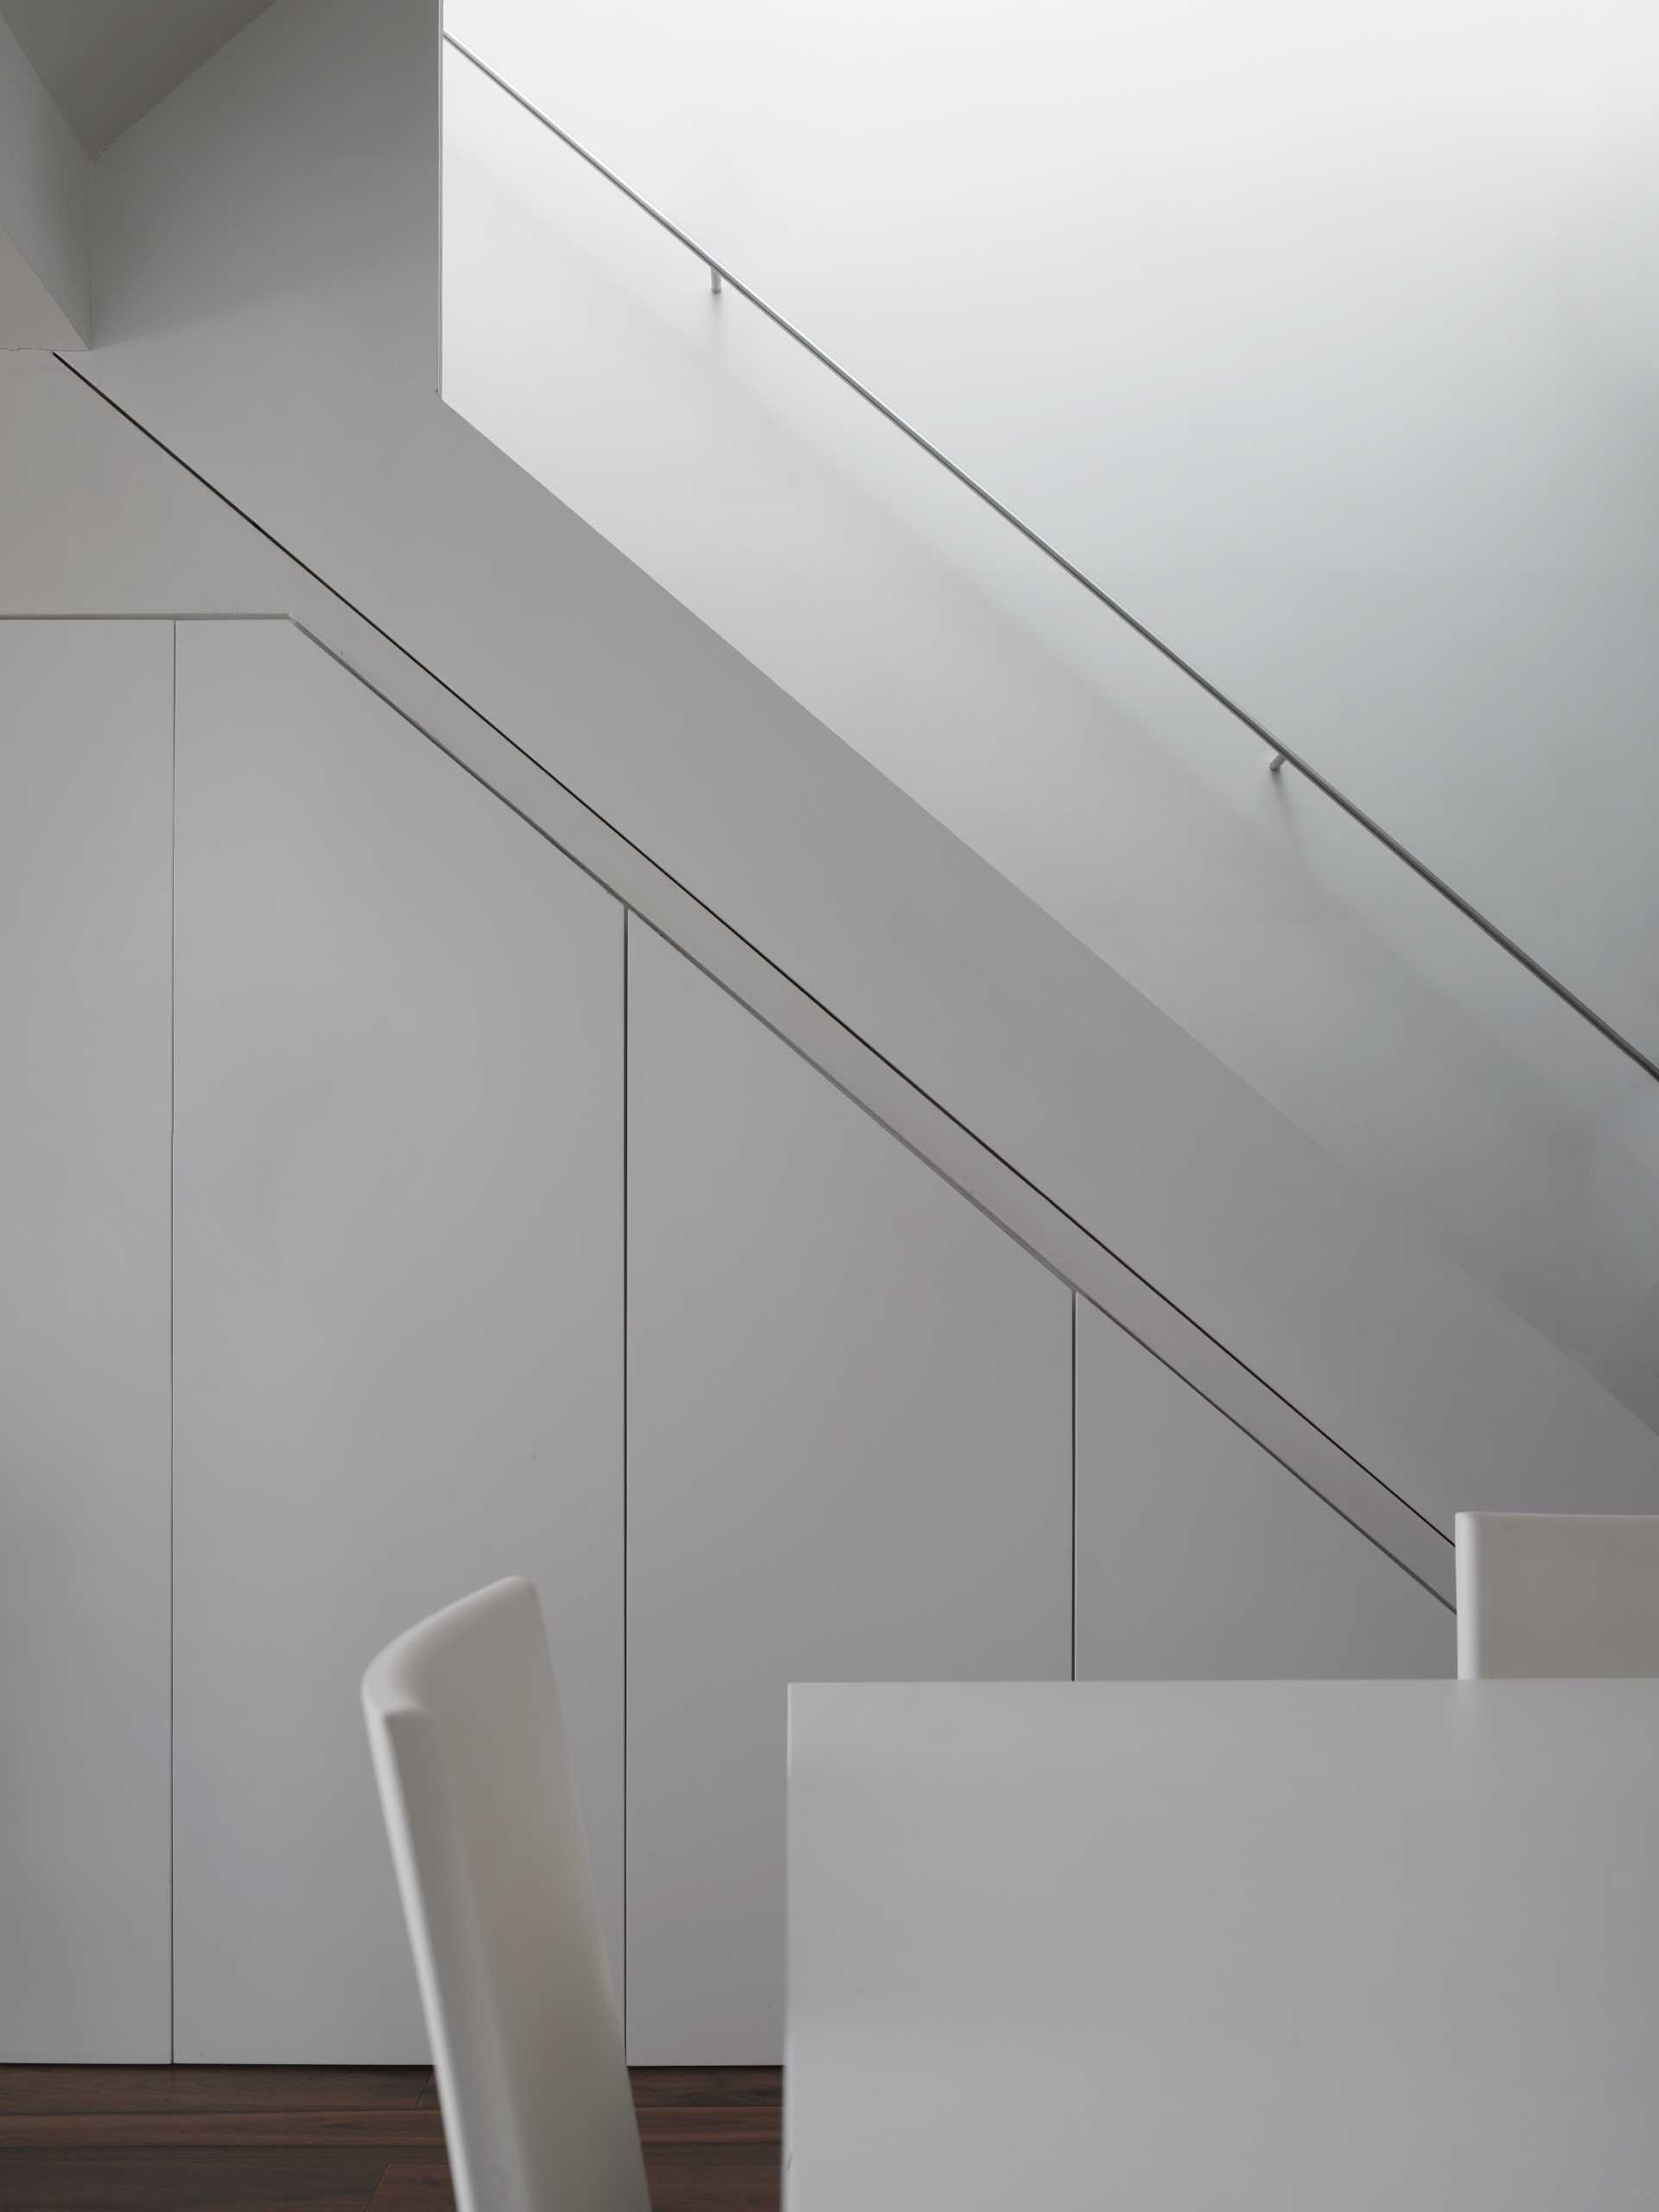 A white dining table and chairs perfectly match the stairs and walls.